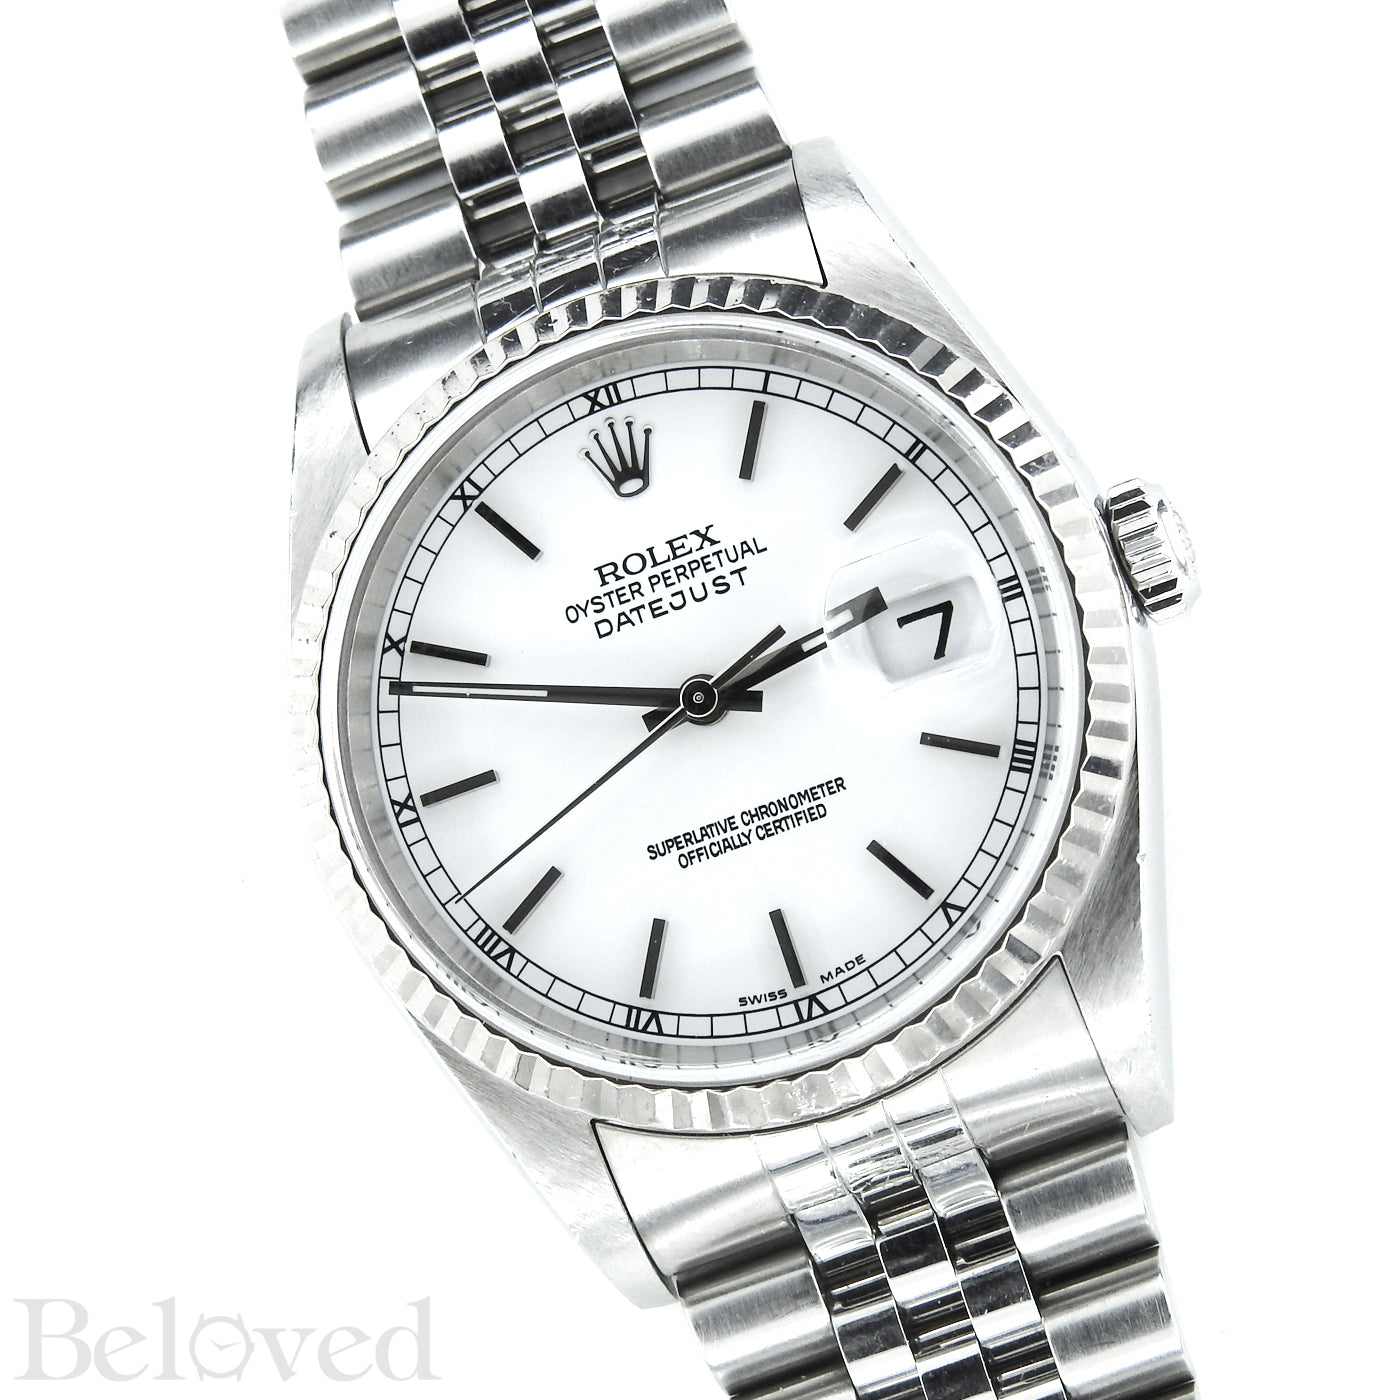 Rolex Datejust 16234 White Dial with Box and Papers Image 3